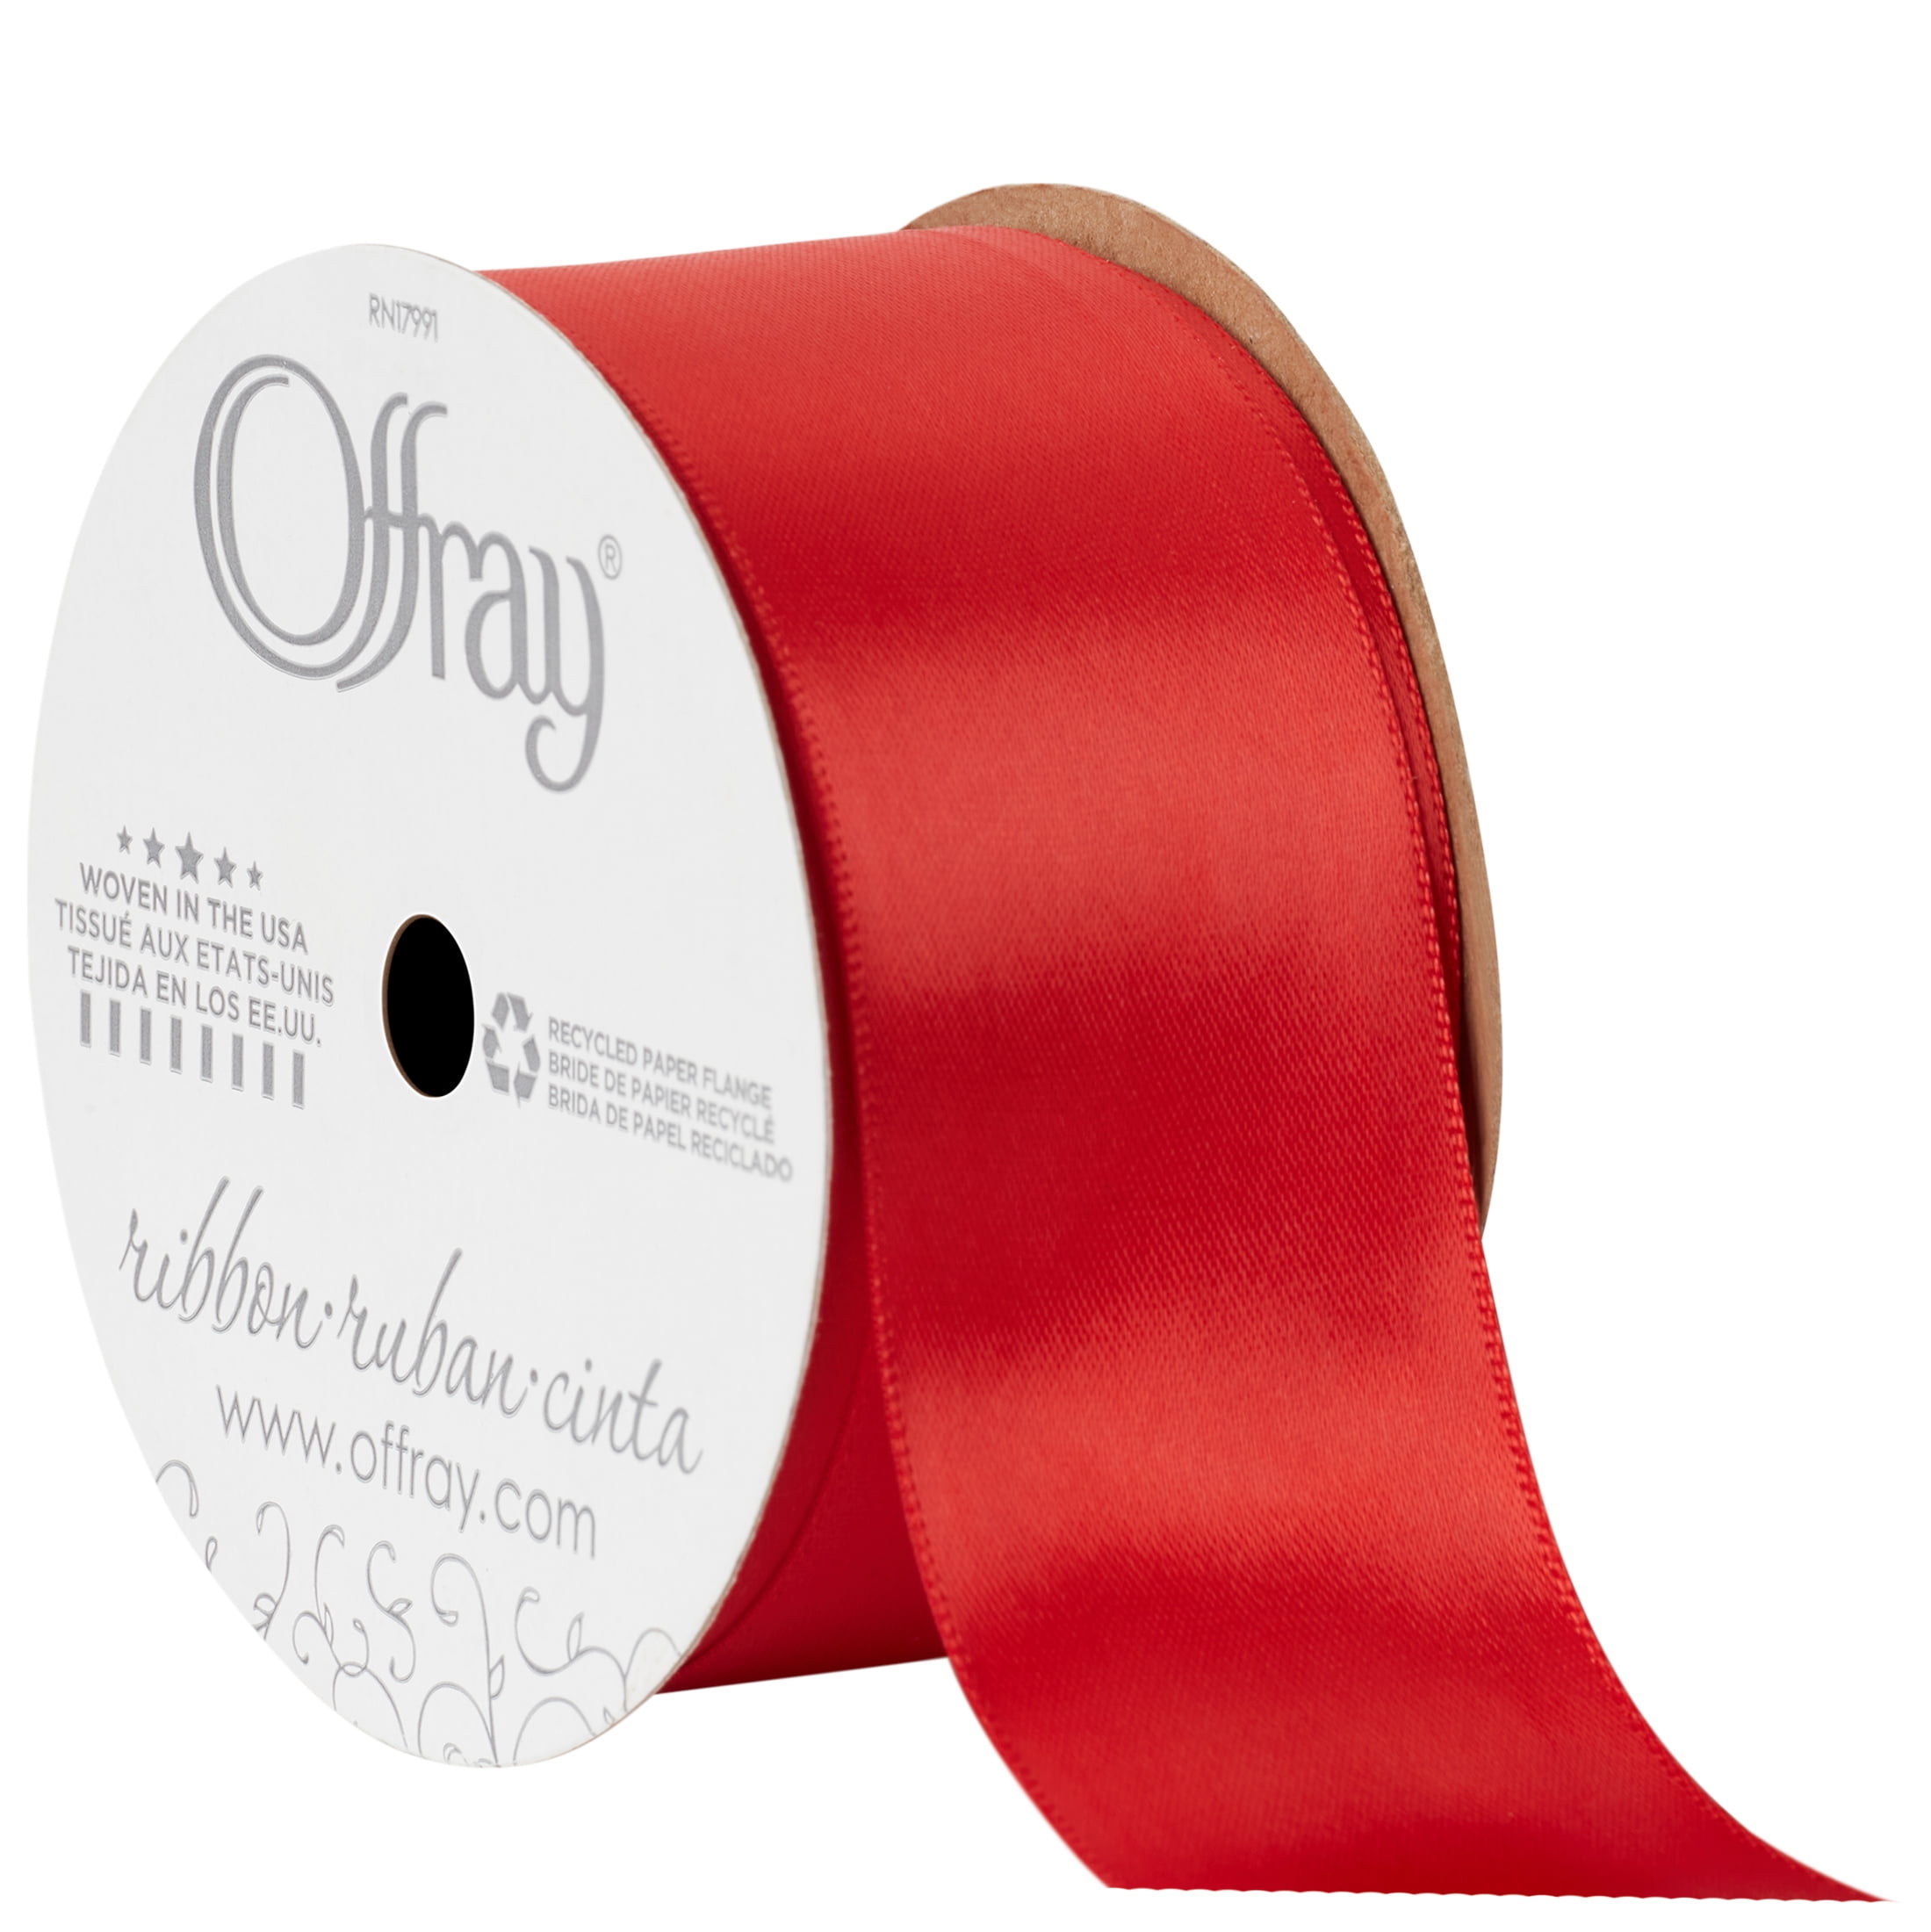 Offray Ribbon, Red 1 1/2 inch Double Face Satin Polyester Ribbon, 12 feet